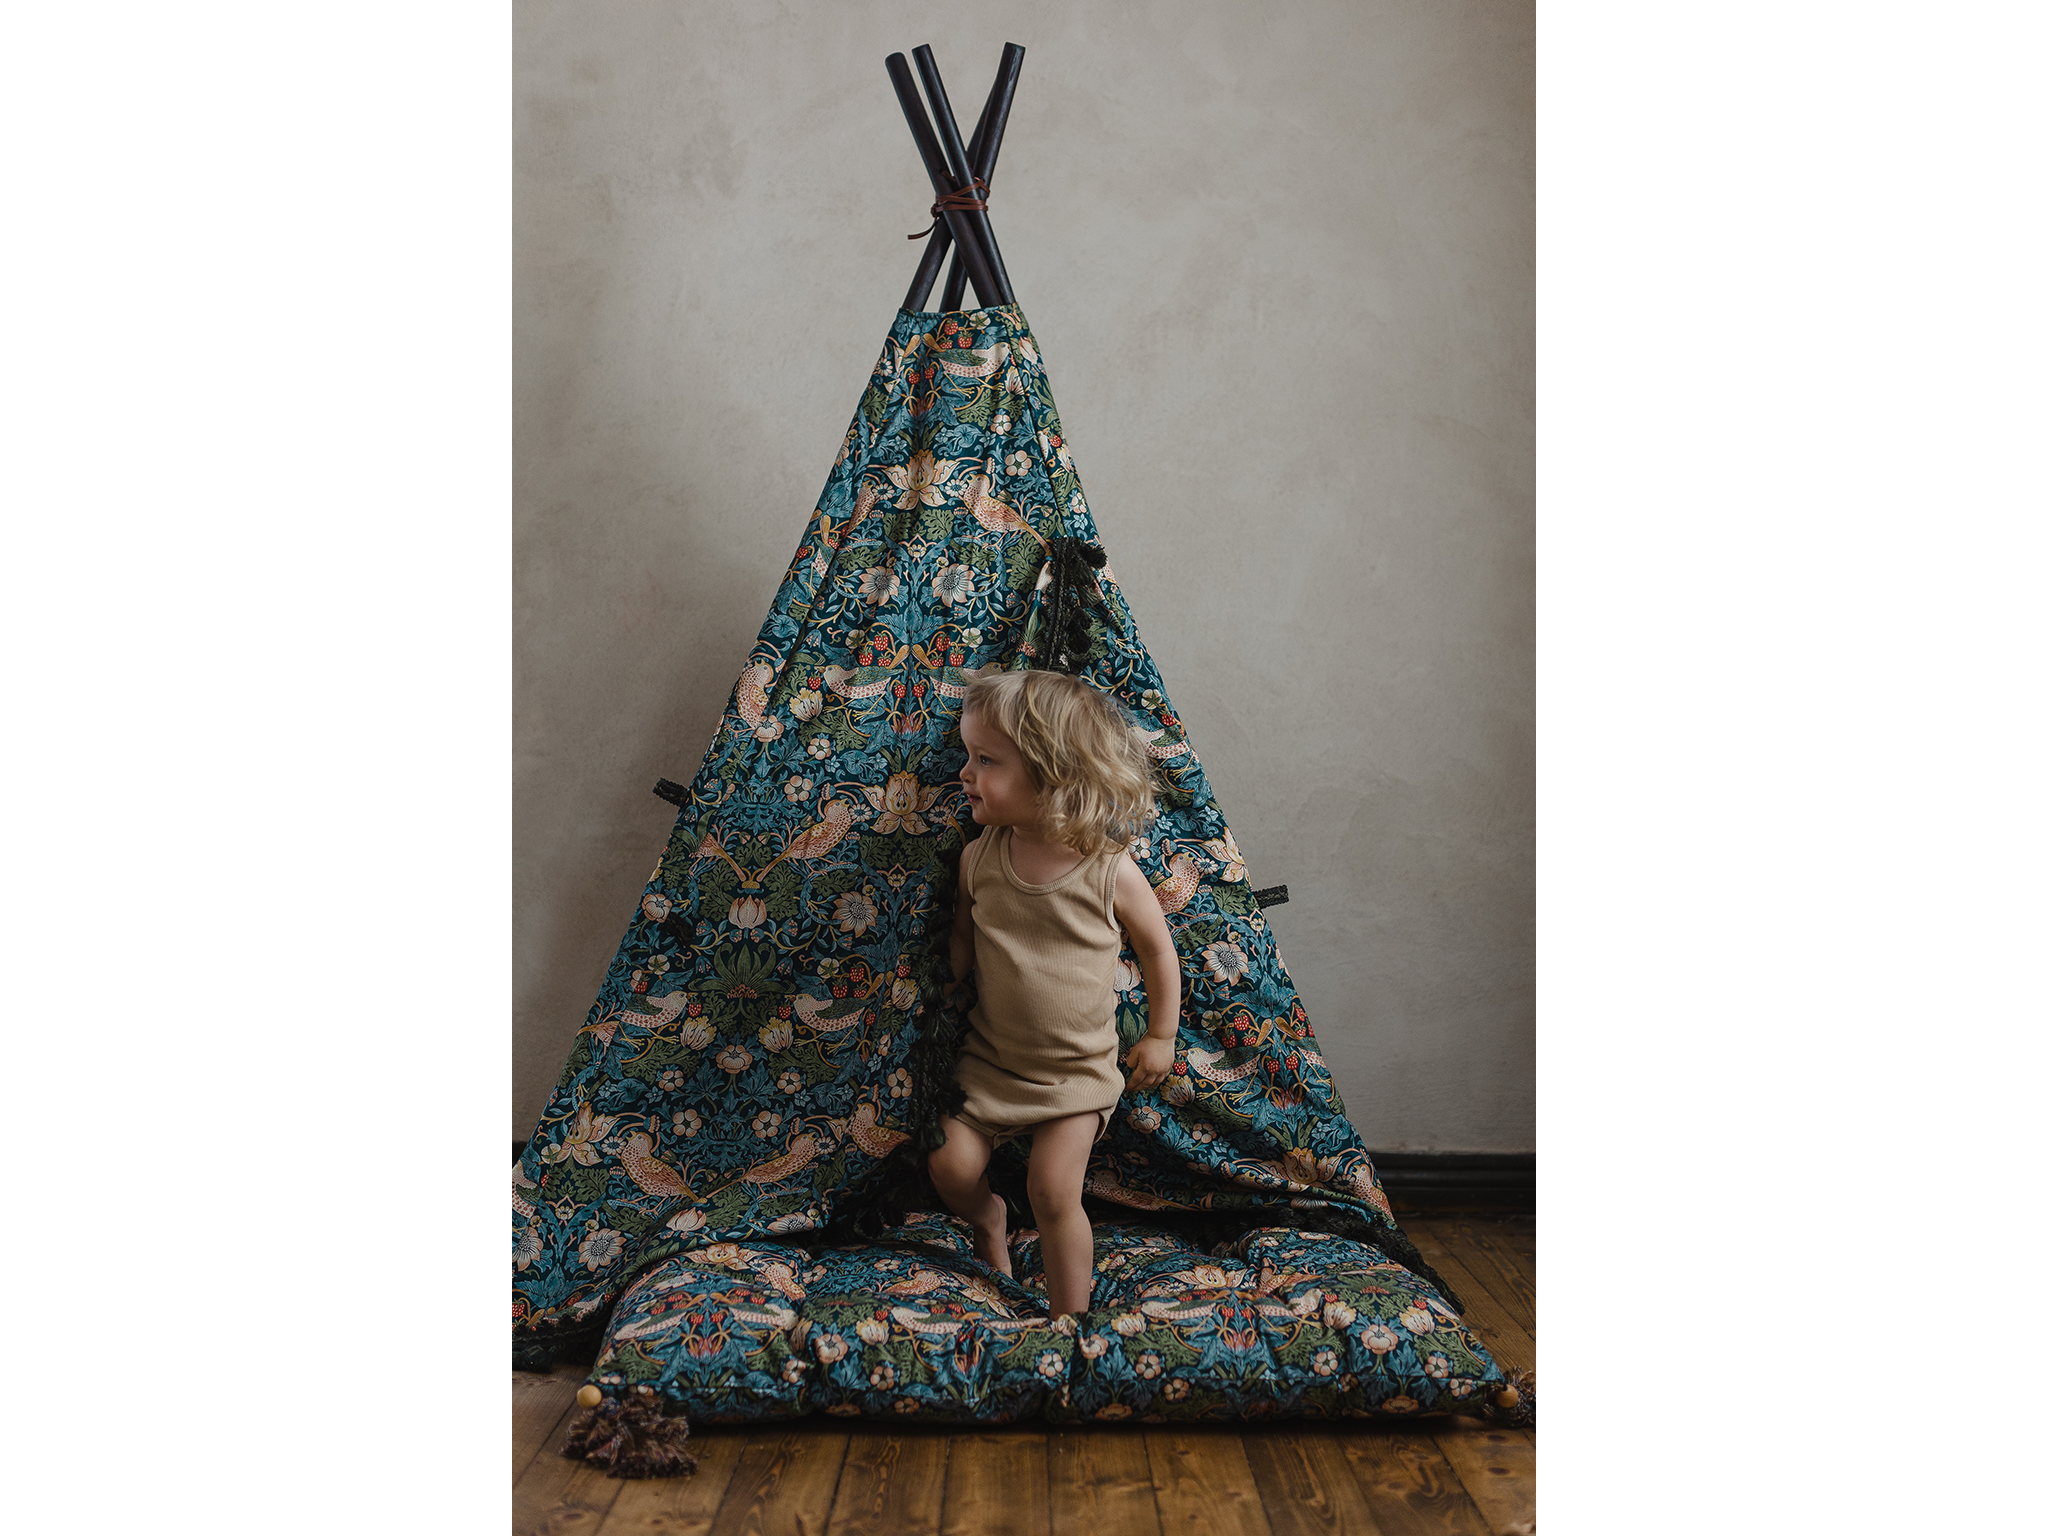 MallBest Kids Play Tents Indian Teepee Tent Children Playhouse Canvas Portable for Indoor and Outdoor 